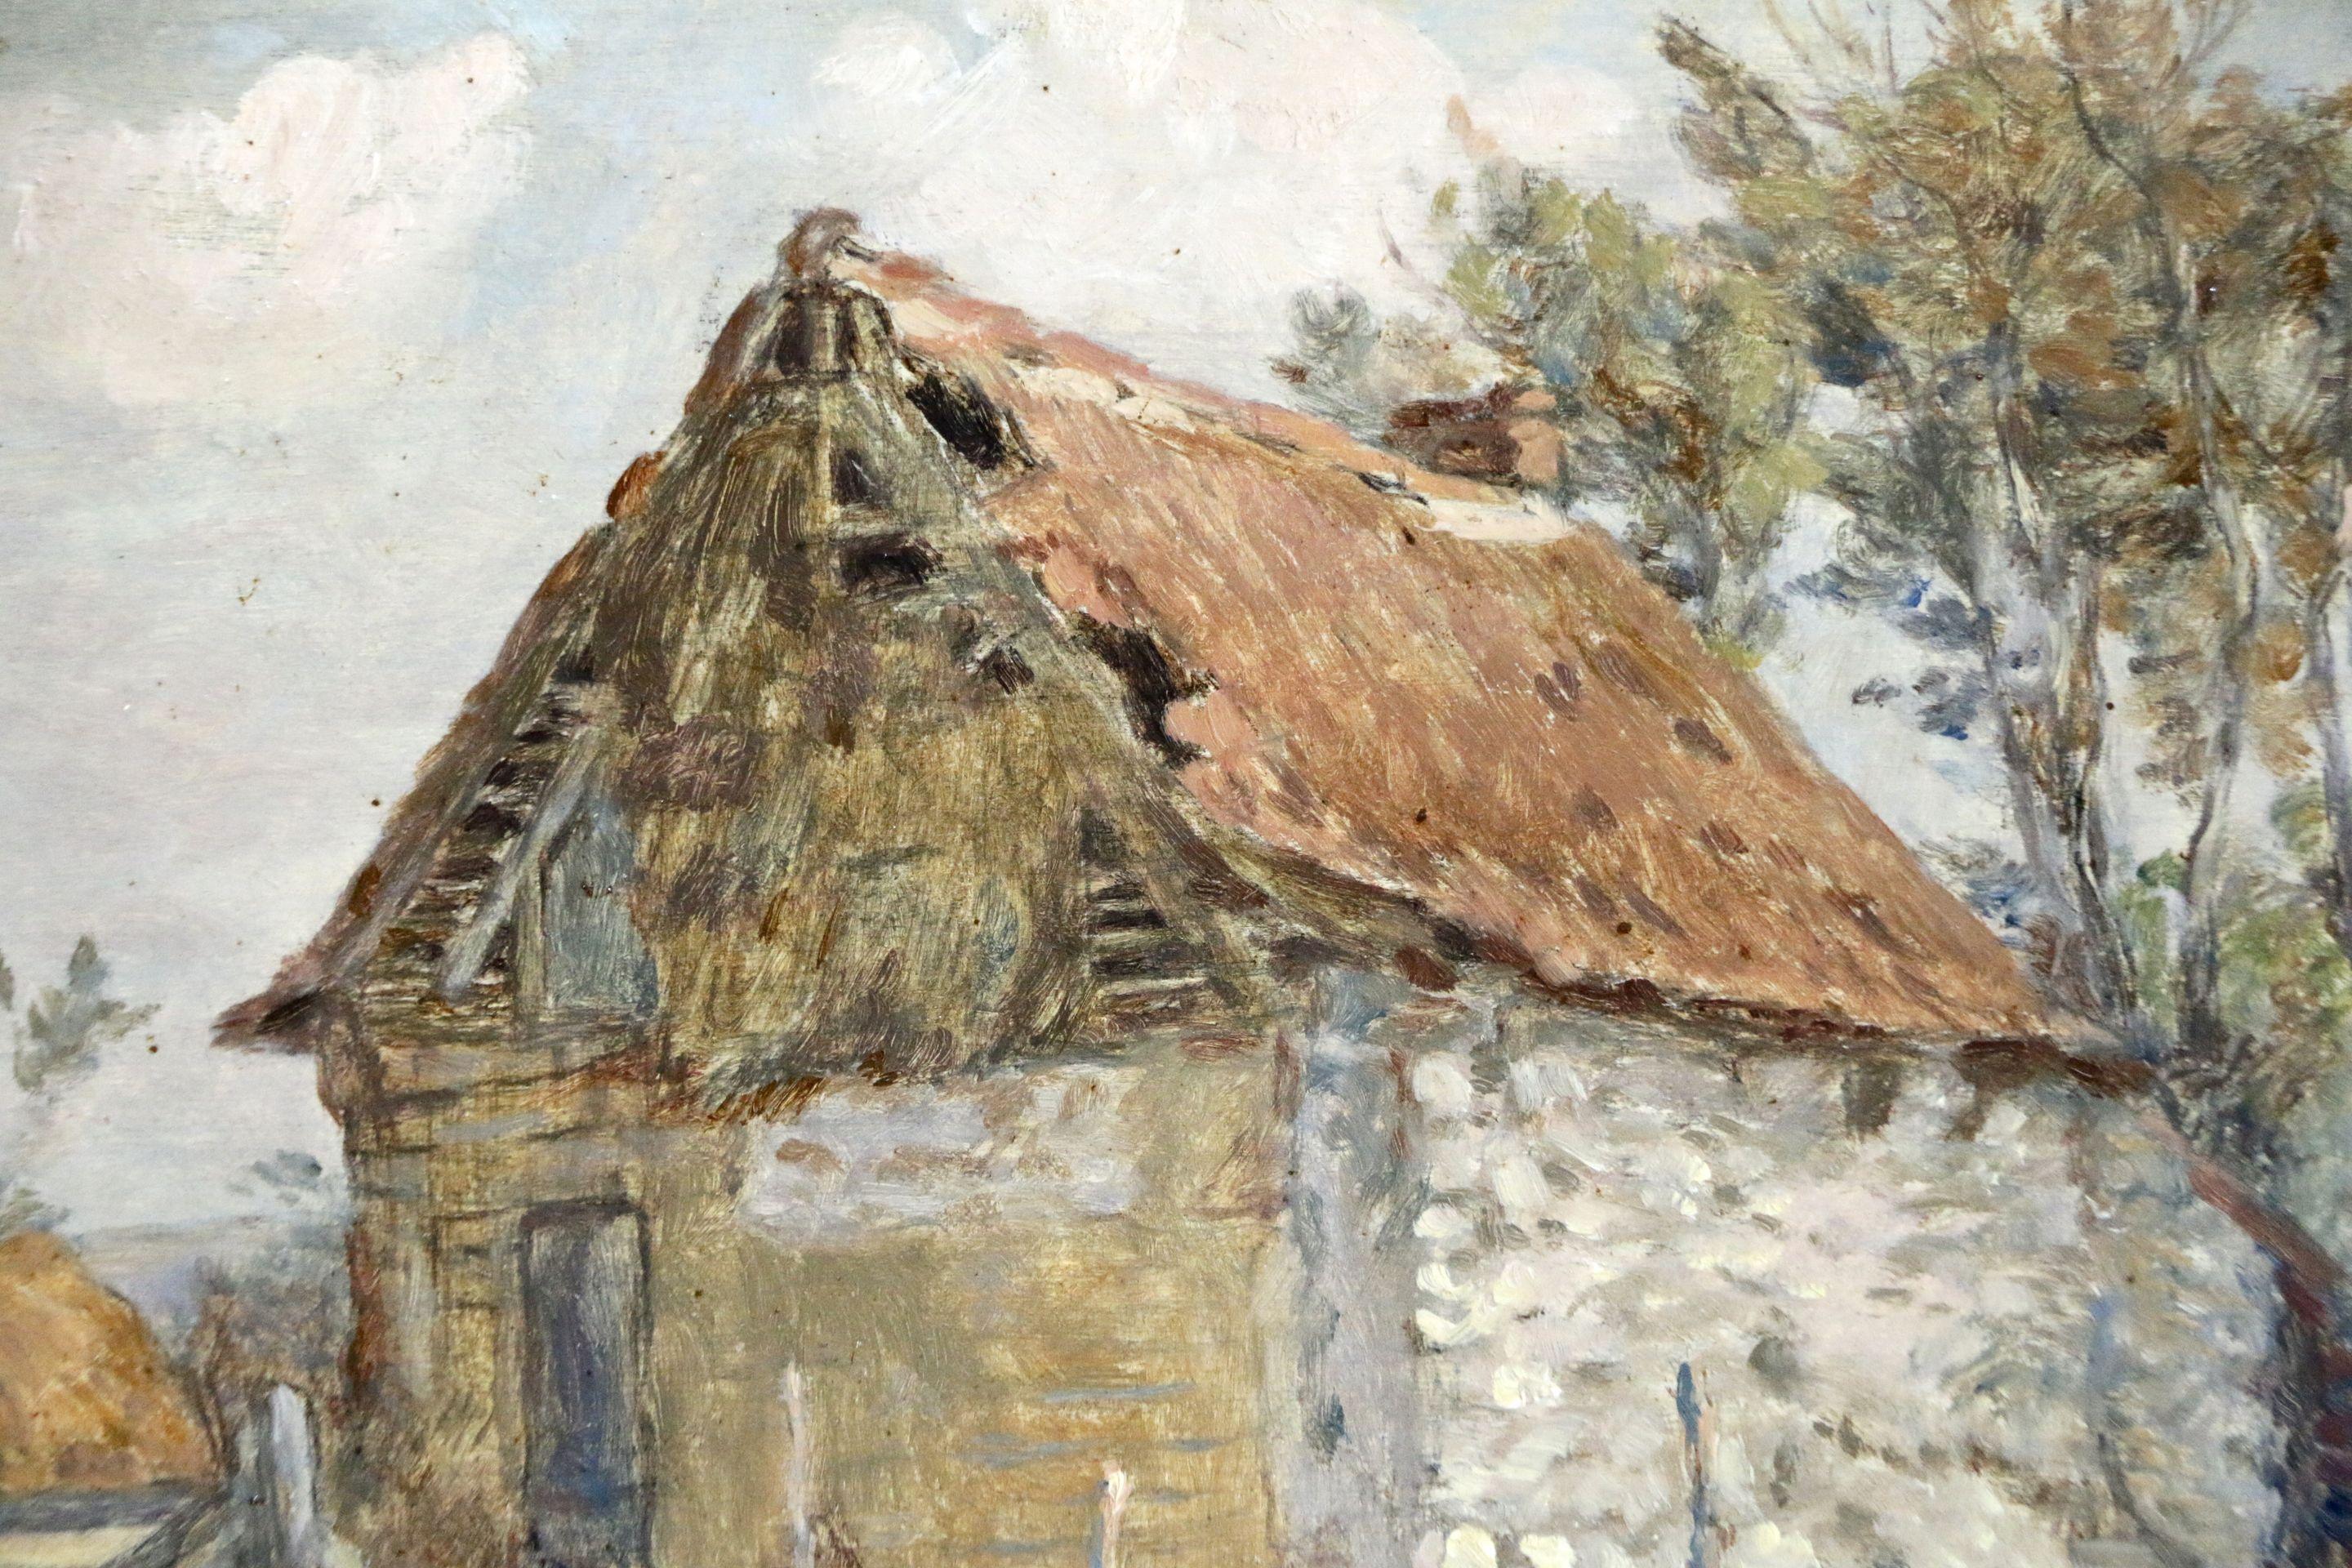 Oil on panel circa 1905. Signed lower right. This painting is not currently framed but a suitable frame can be sourced if required.

Marie Duhem, was born in Guemps on March 18, 1871 and died in Douai on July 9, 1918.
 
Marie Duhem's parents ran a